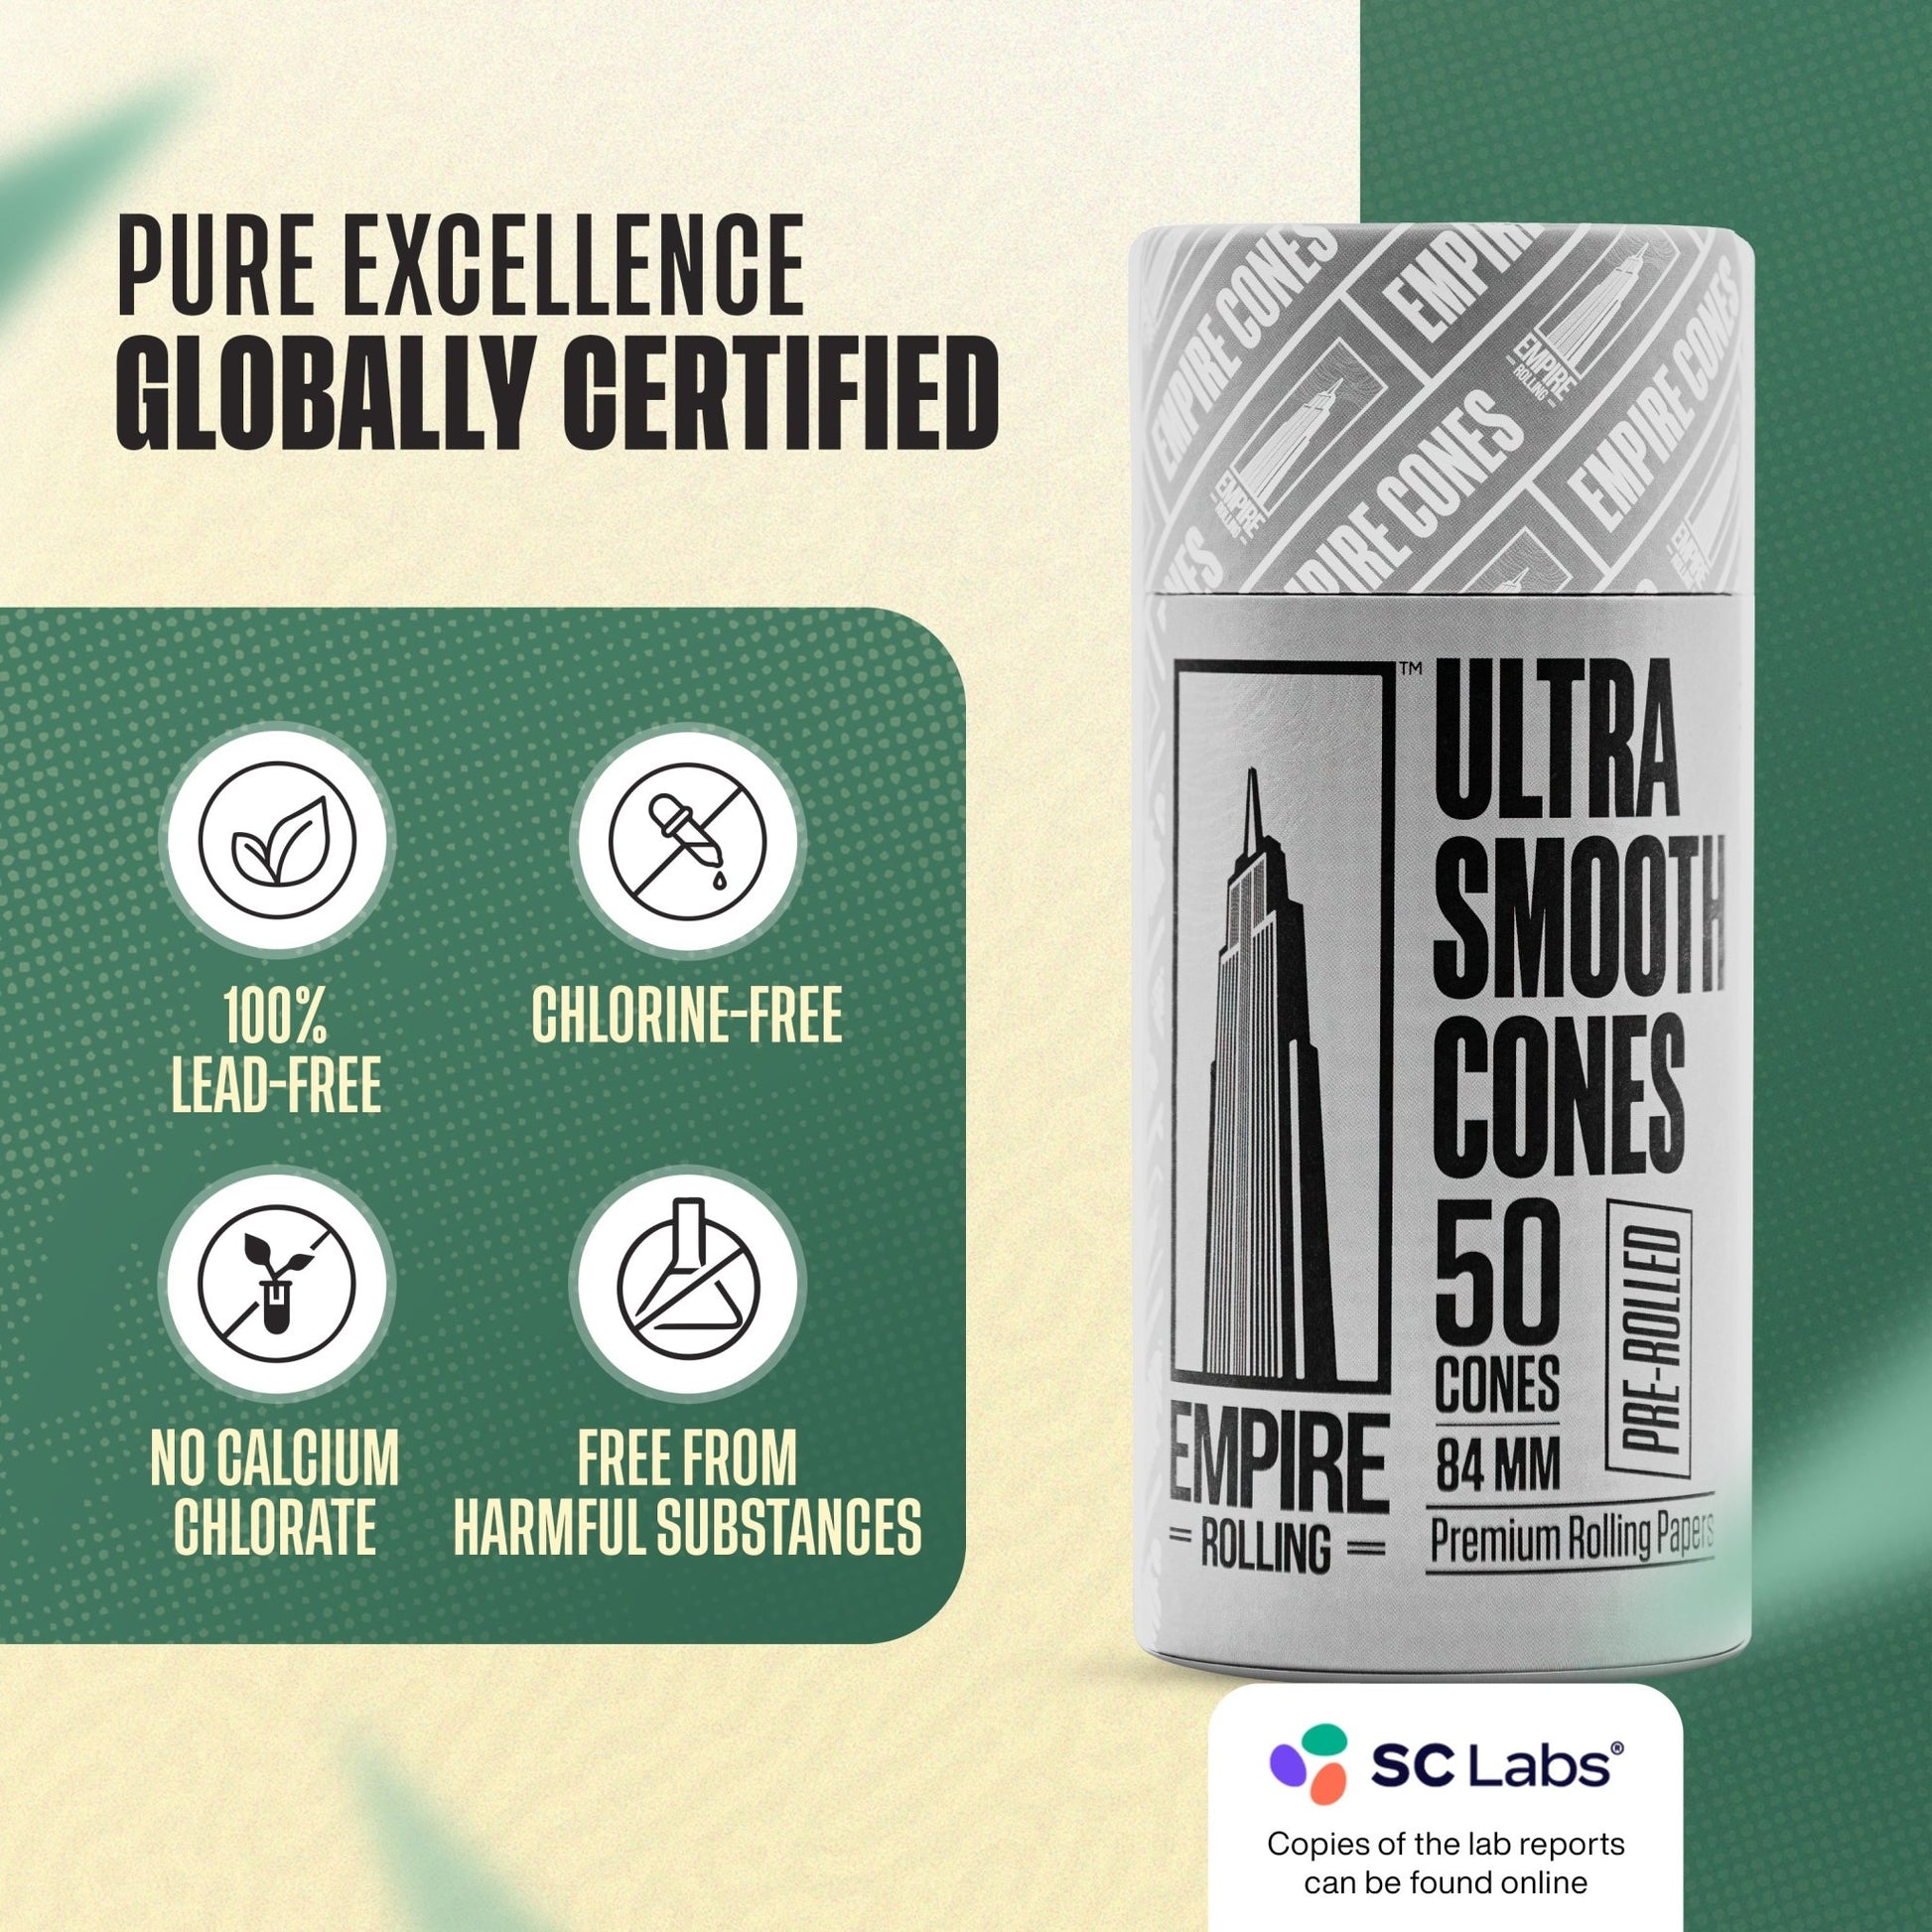 Empire Rolling's King Size Organic Hemp Rolling Papers, eco-friendly and crafted with high-quality, natural materials for a premium smoking experience.Ultra Smooth Pure White Cones 50 Count - Empire Rolling Papers